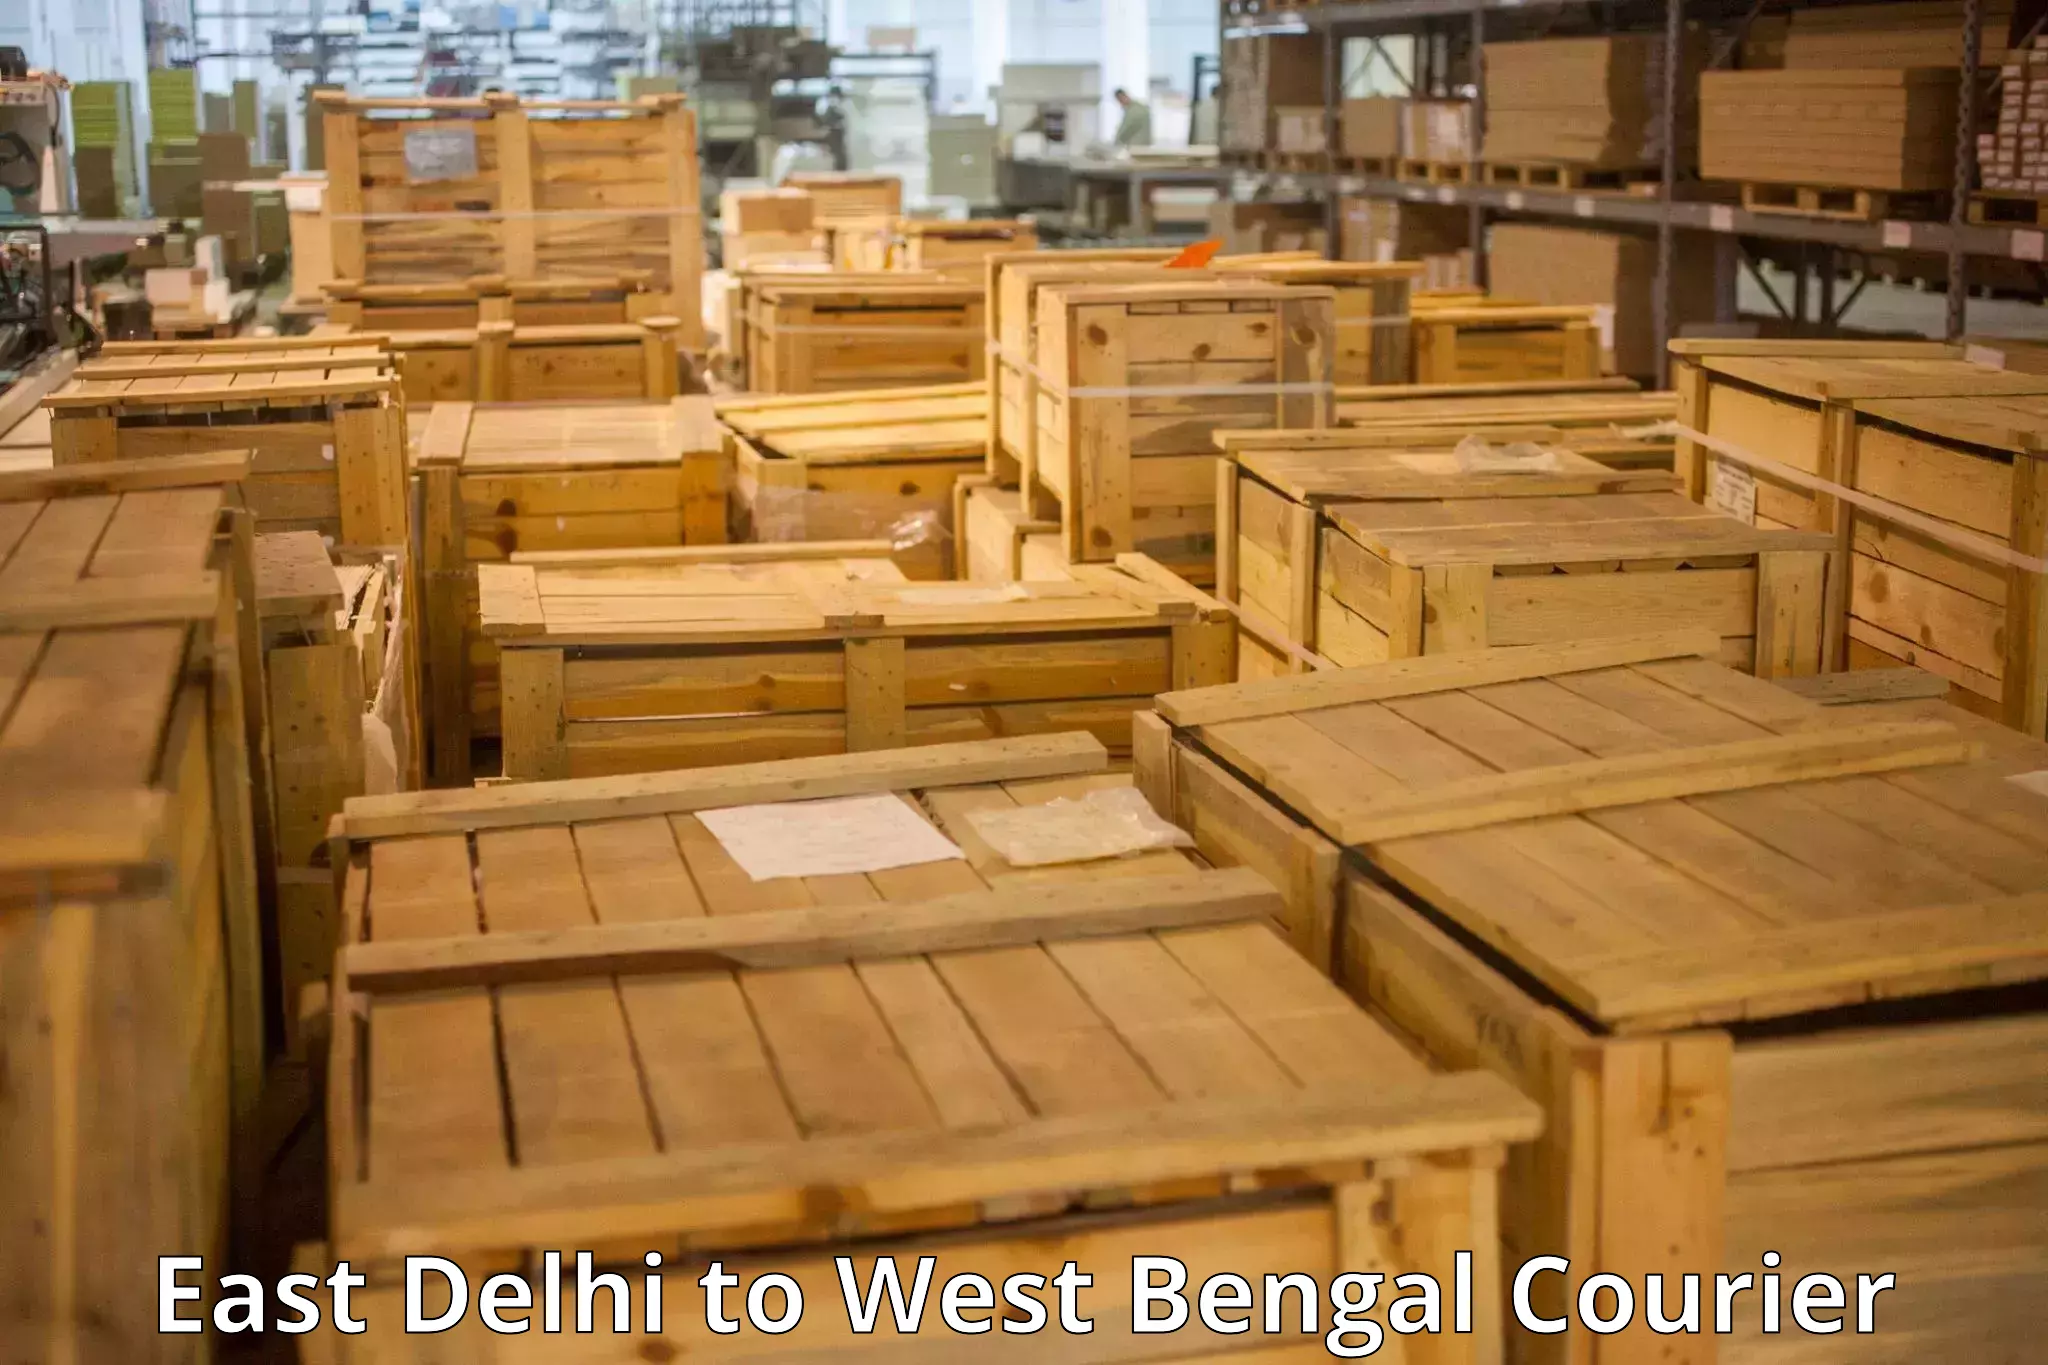 Luggage transport consultancy East Delhi to West Bengal